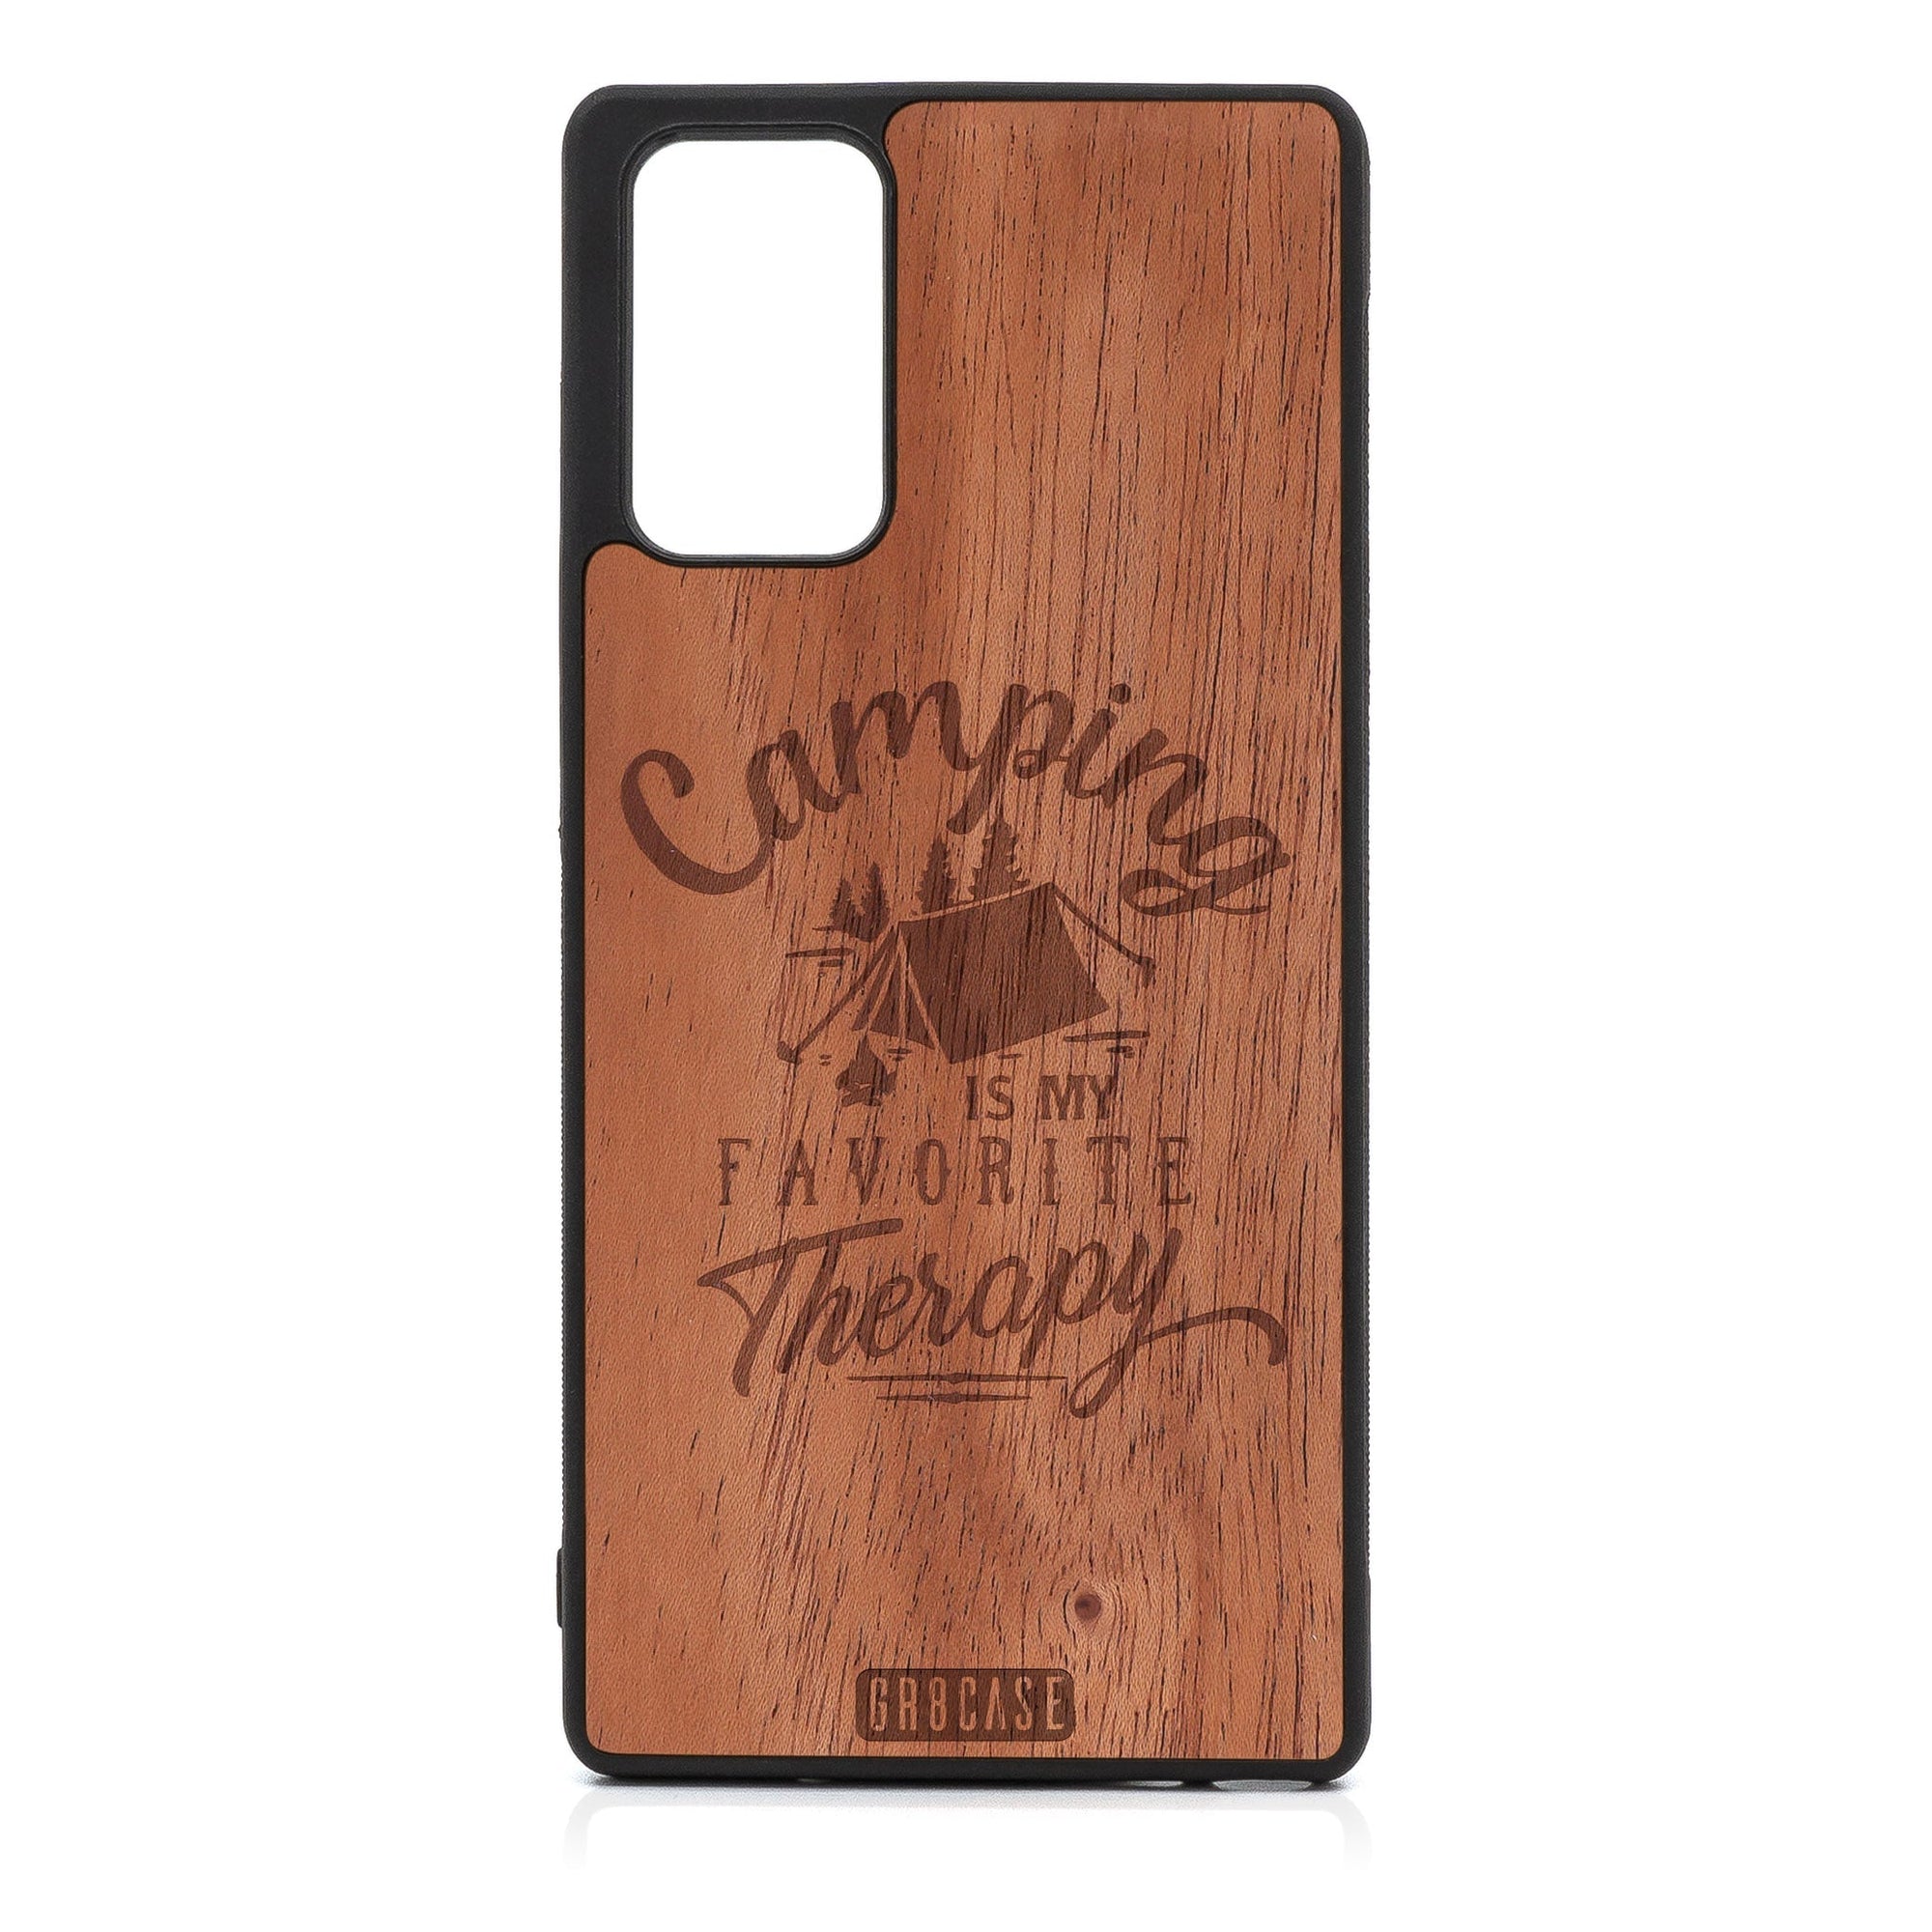 Camping Is My Favorite Therapy Design Wood Case For Samsung Galaxy A72 5G